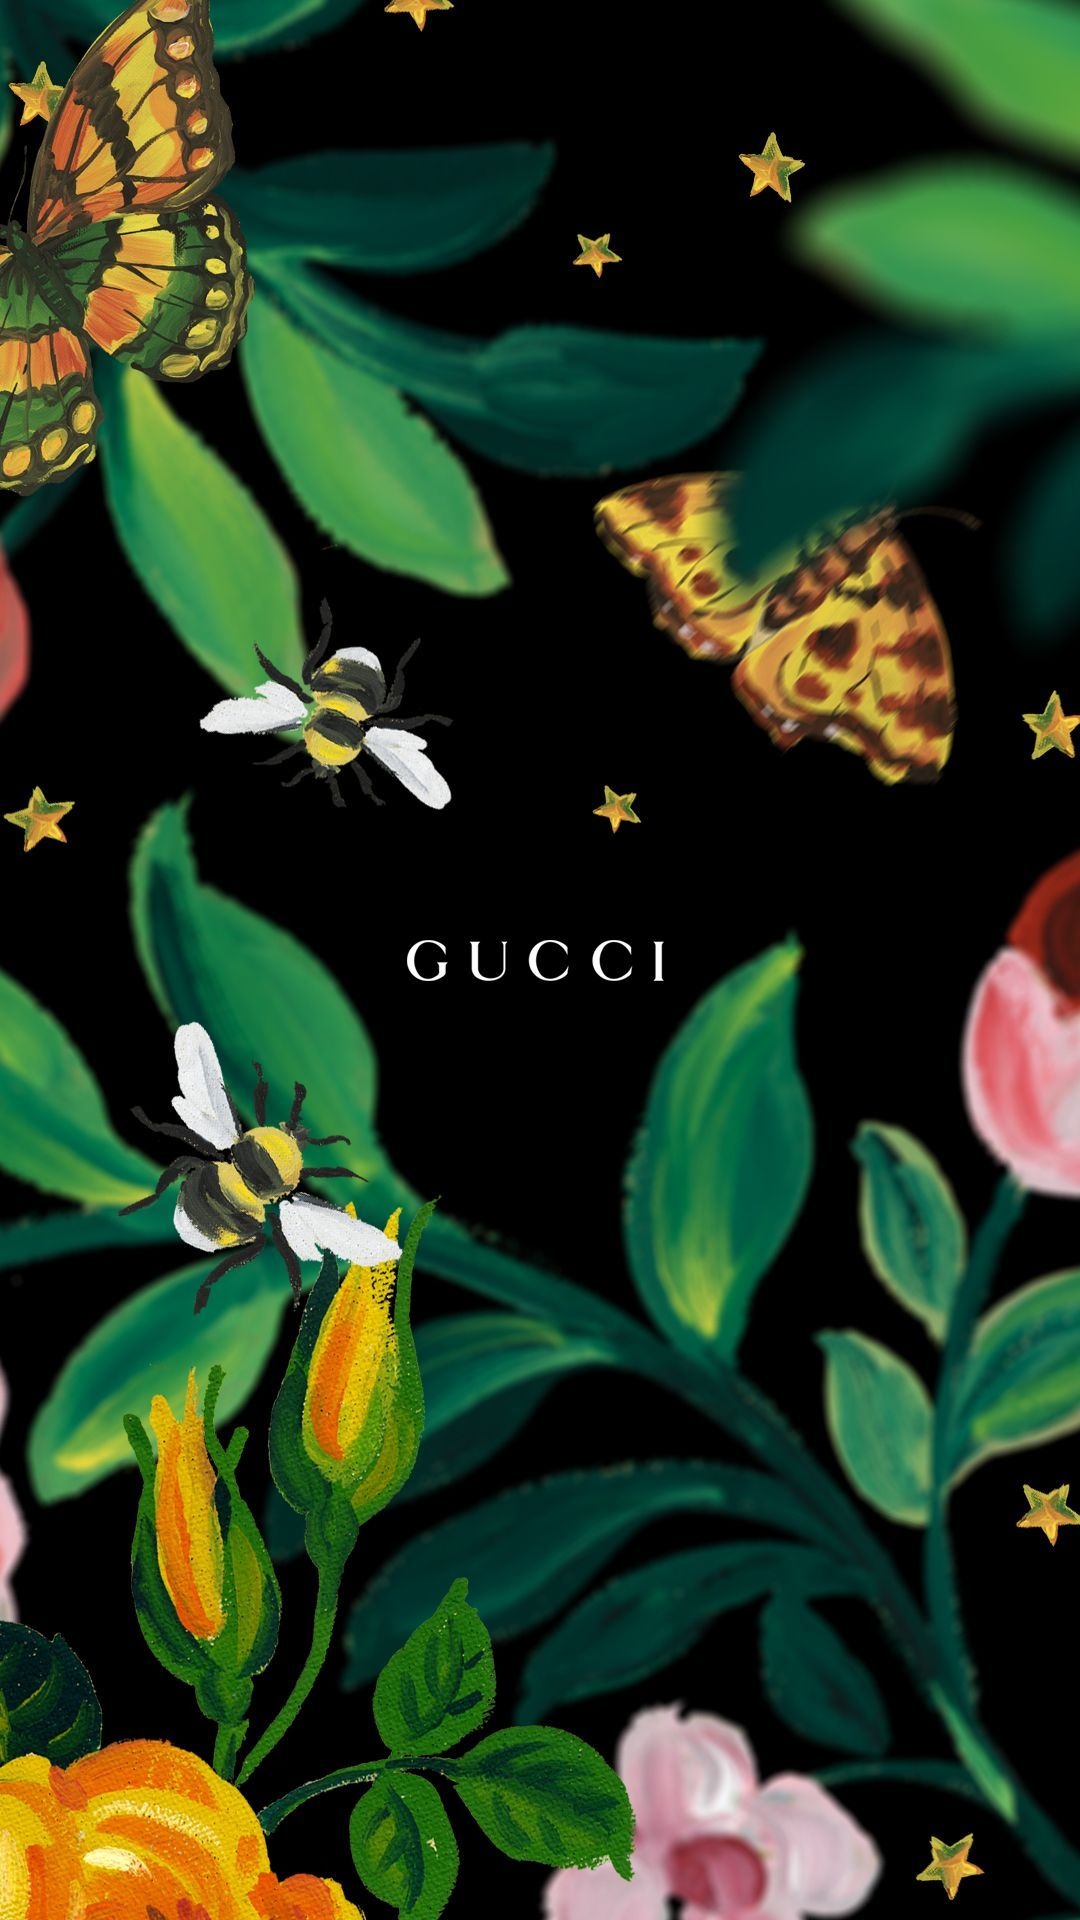 Gucci: Original flora print, The butterfly, A symbol of Gucci's past and present. 1080x1920 Full HD Background.